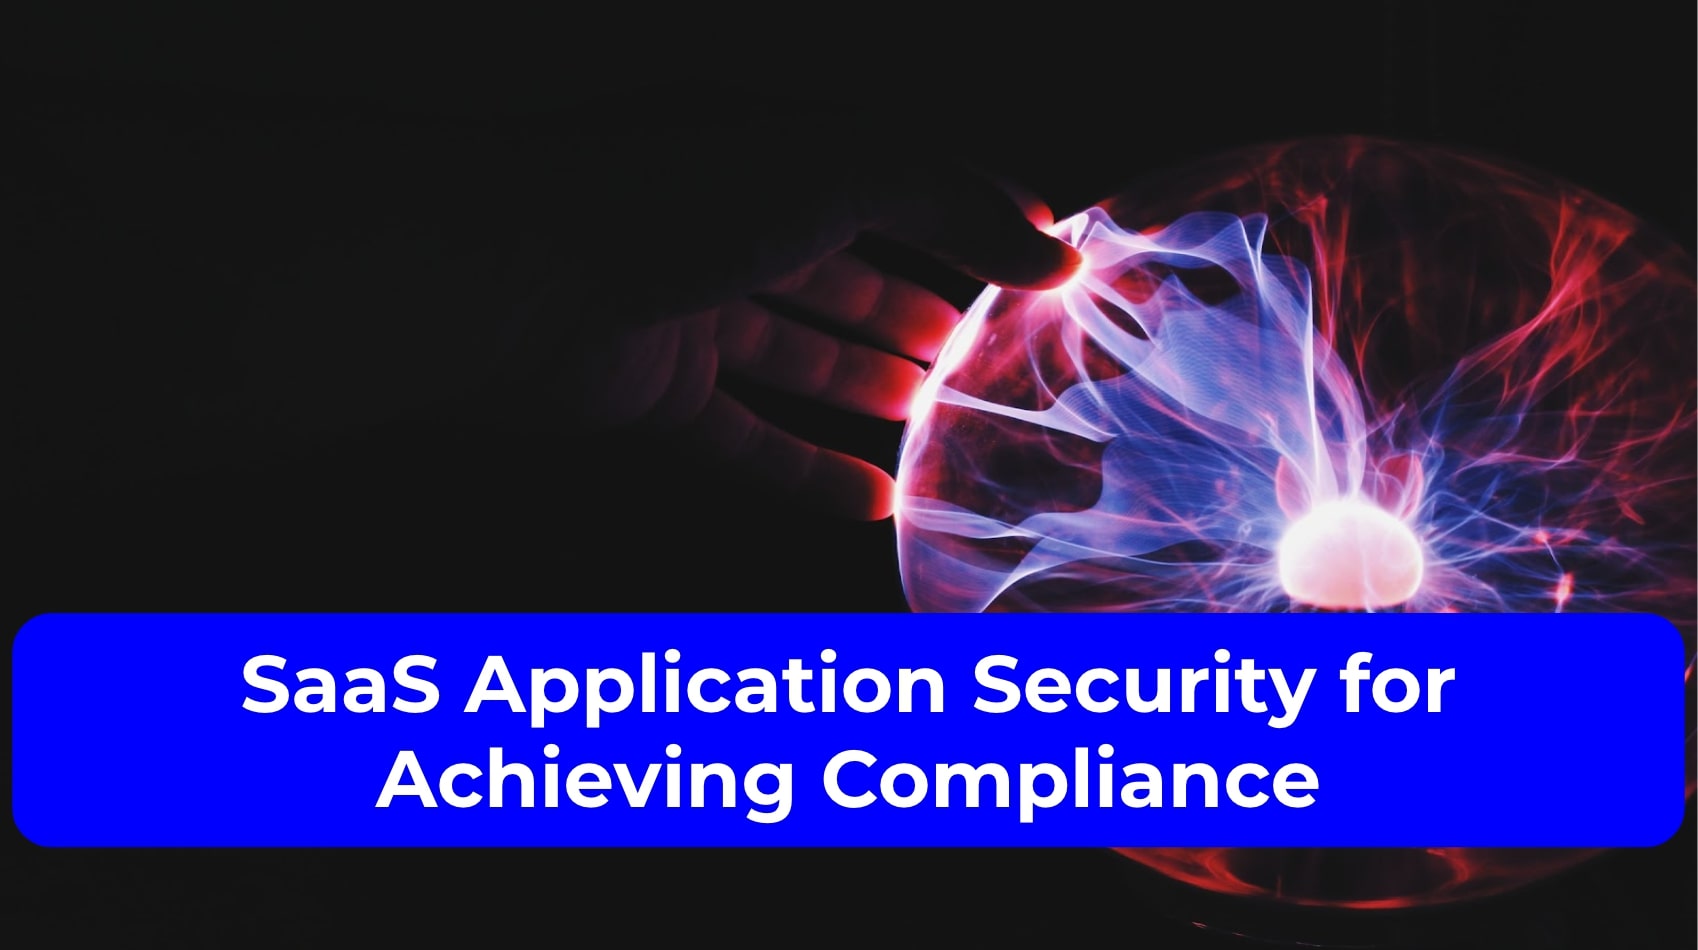 SaaS Application Security for Achieving Compliance